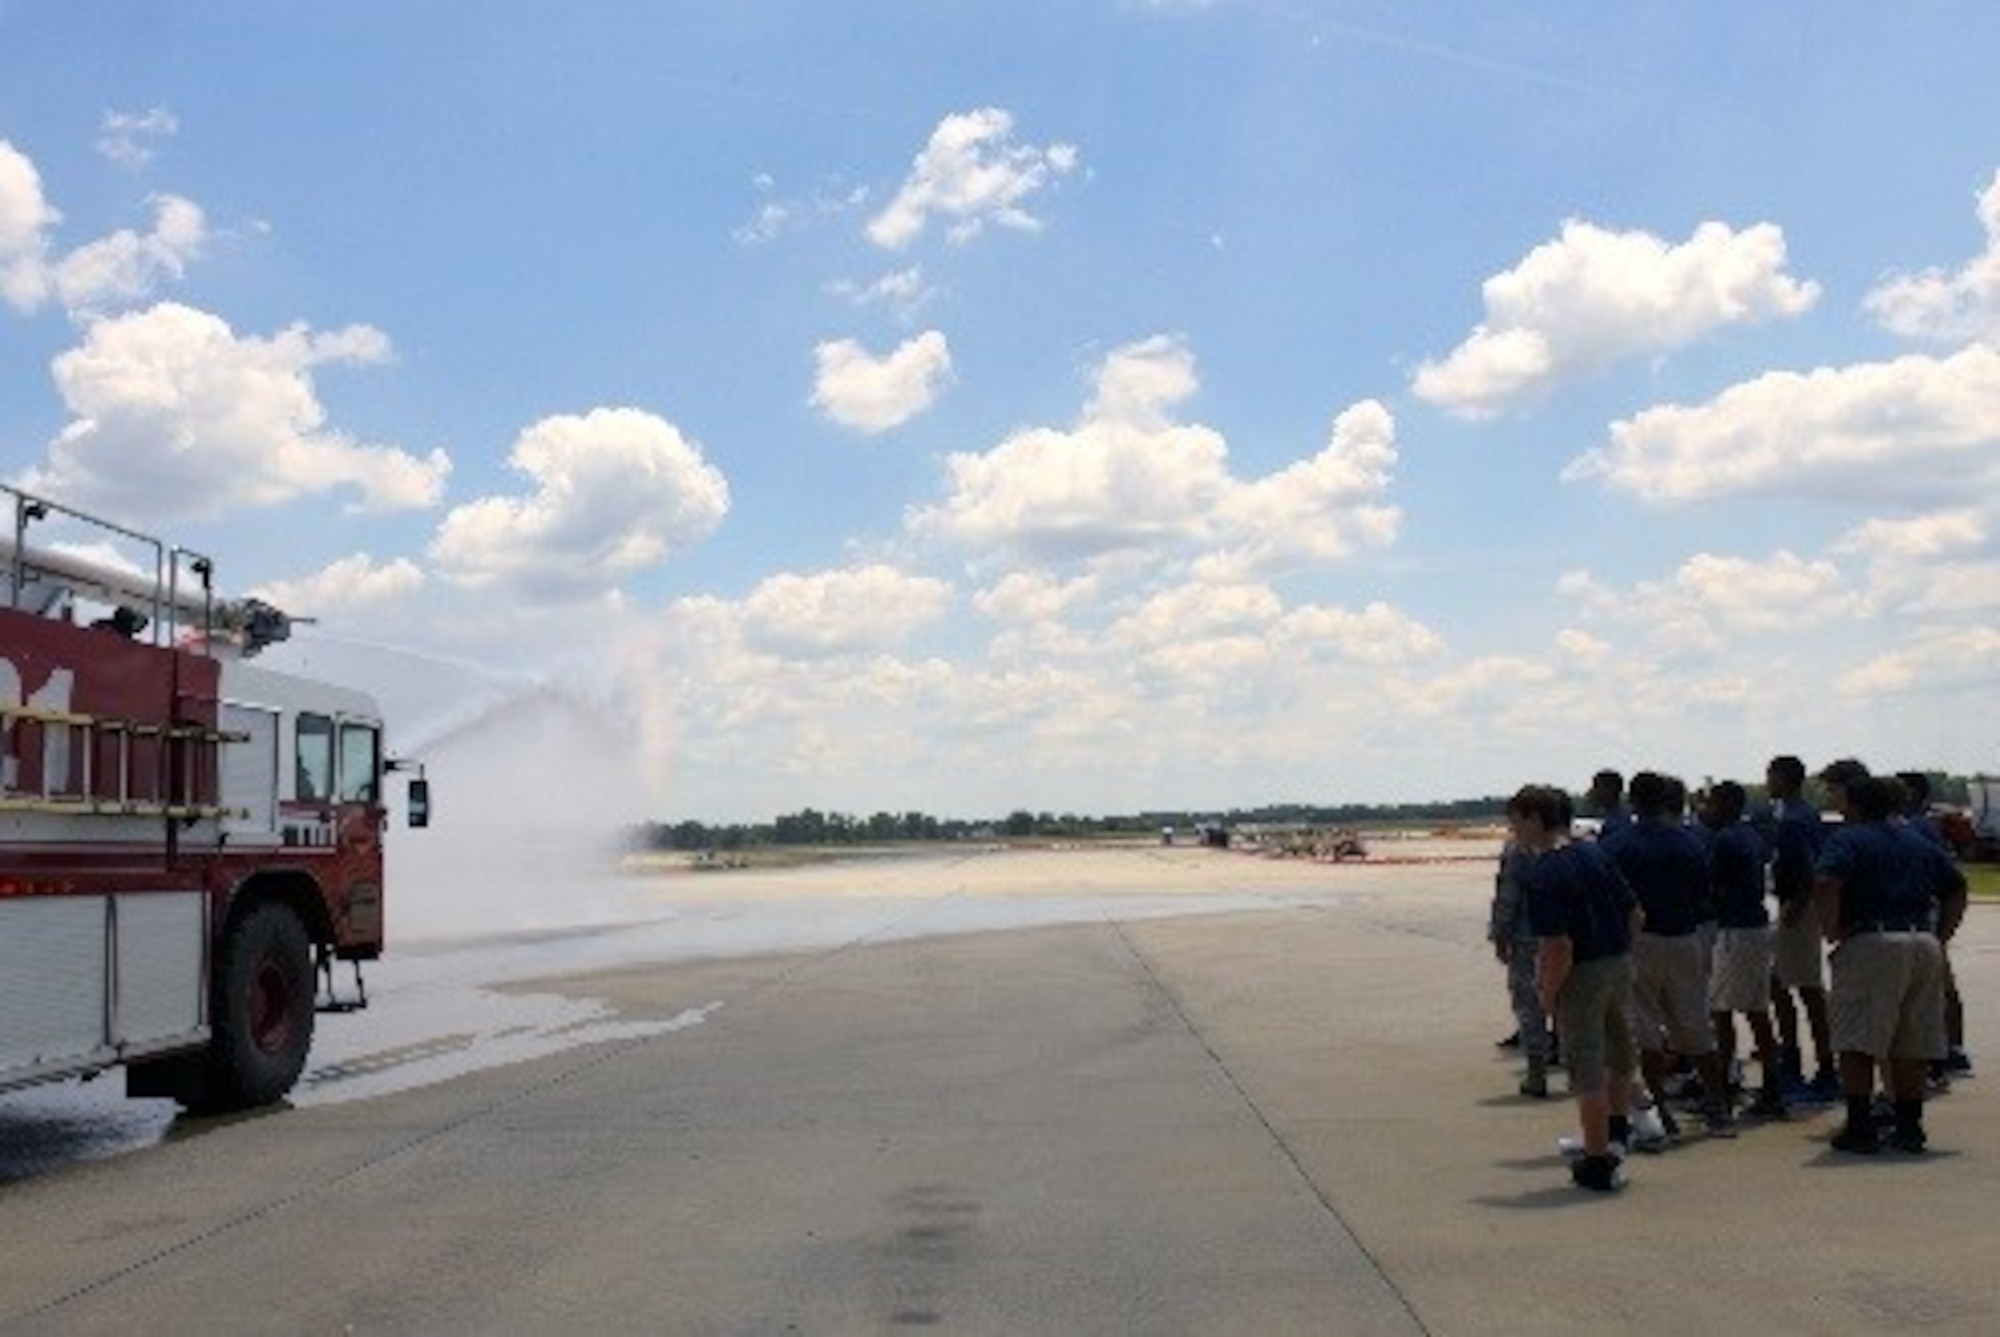 Camp Confidence students observe a firetruck demonstration during a base tour, June 27, 2016, at Seymour Johnson Air Force Base, North Carolina. During their tour, the students visited the 334th Fighter Squadron, the load barn and the fire station. (U.S. Air Force photo/Airman 1st Class Ashley Williamson)